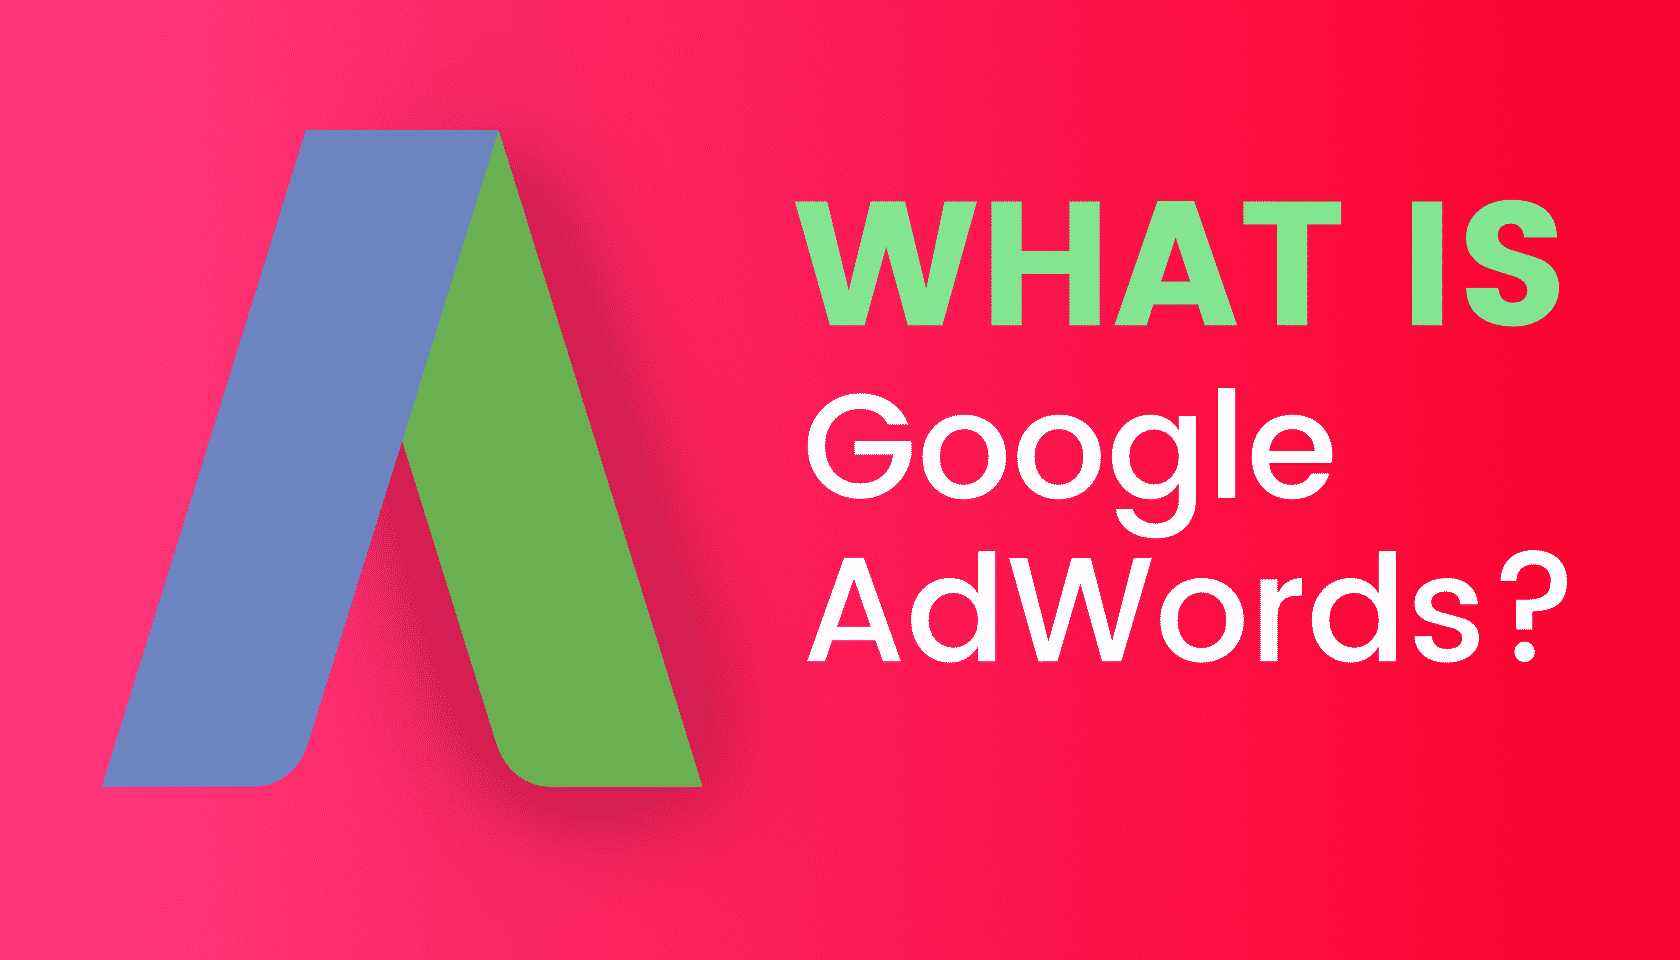 What is: Google AdWords?